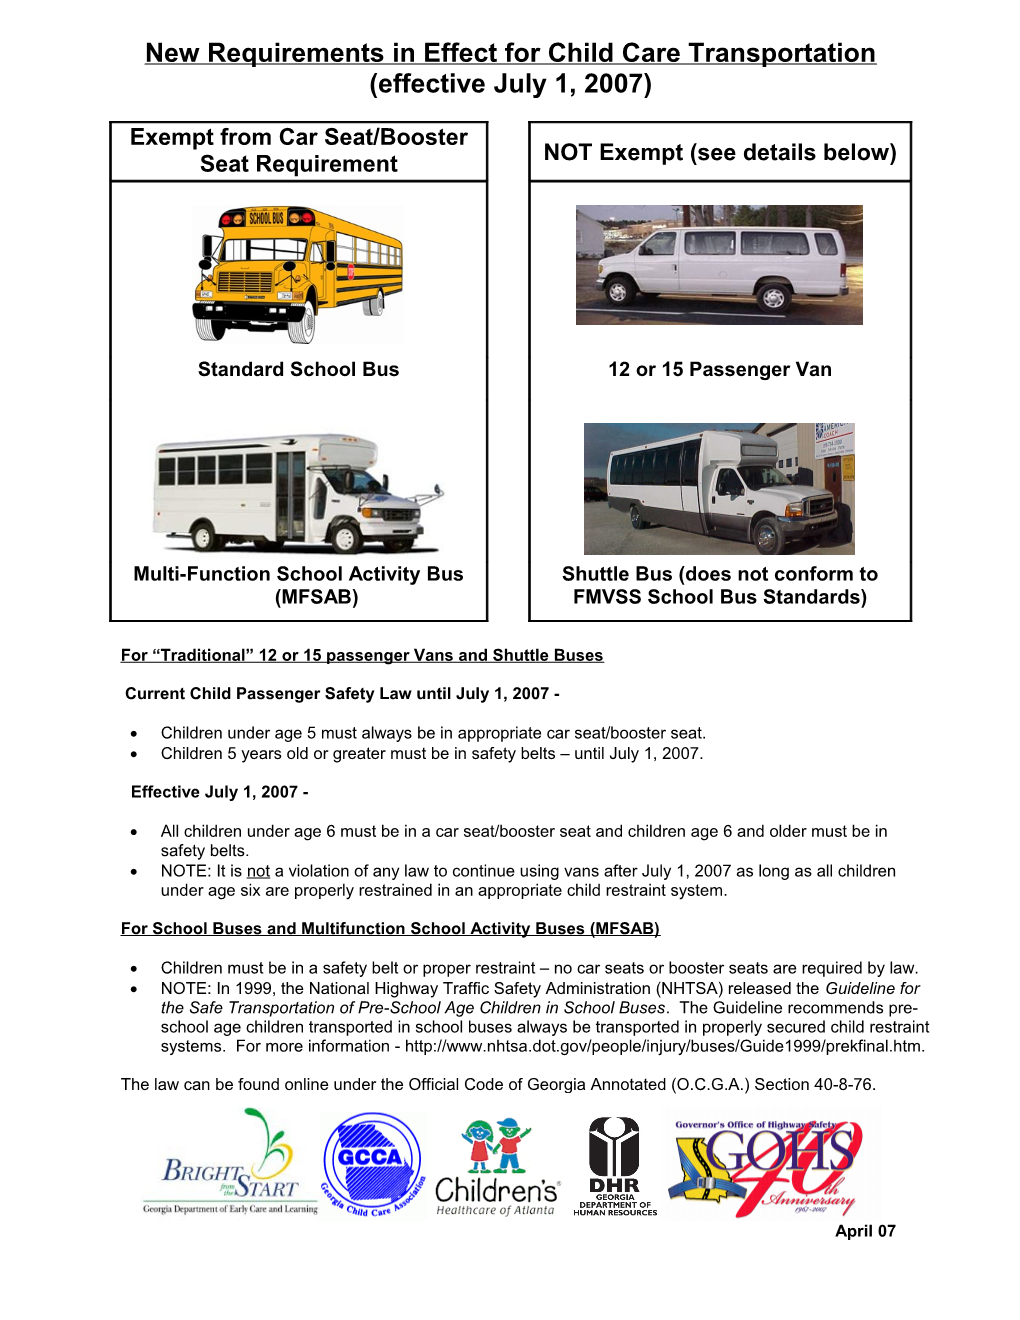 New Requirements in Effect for Child Care Transportation (Effective July 1, 2007)